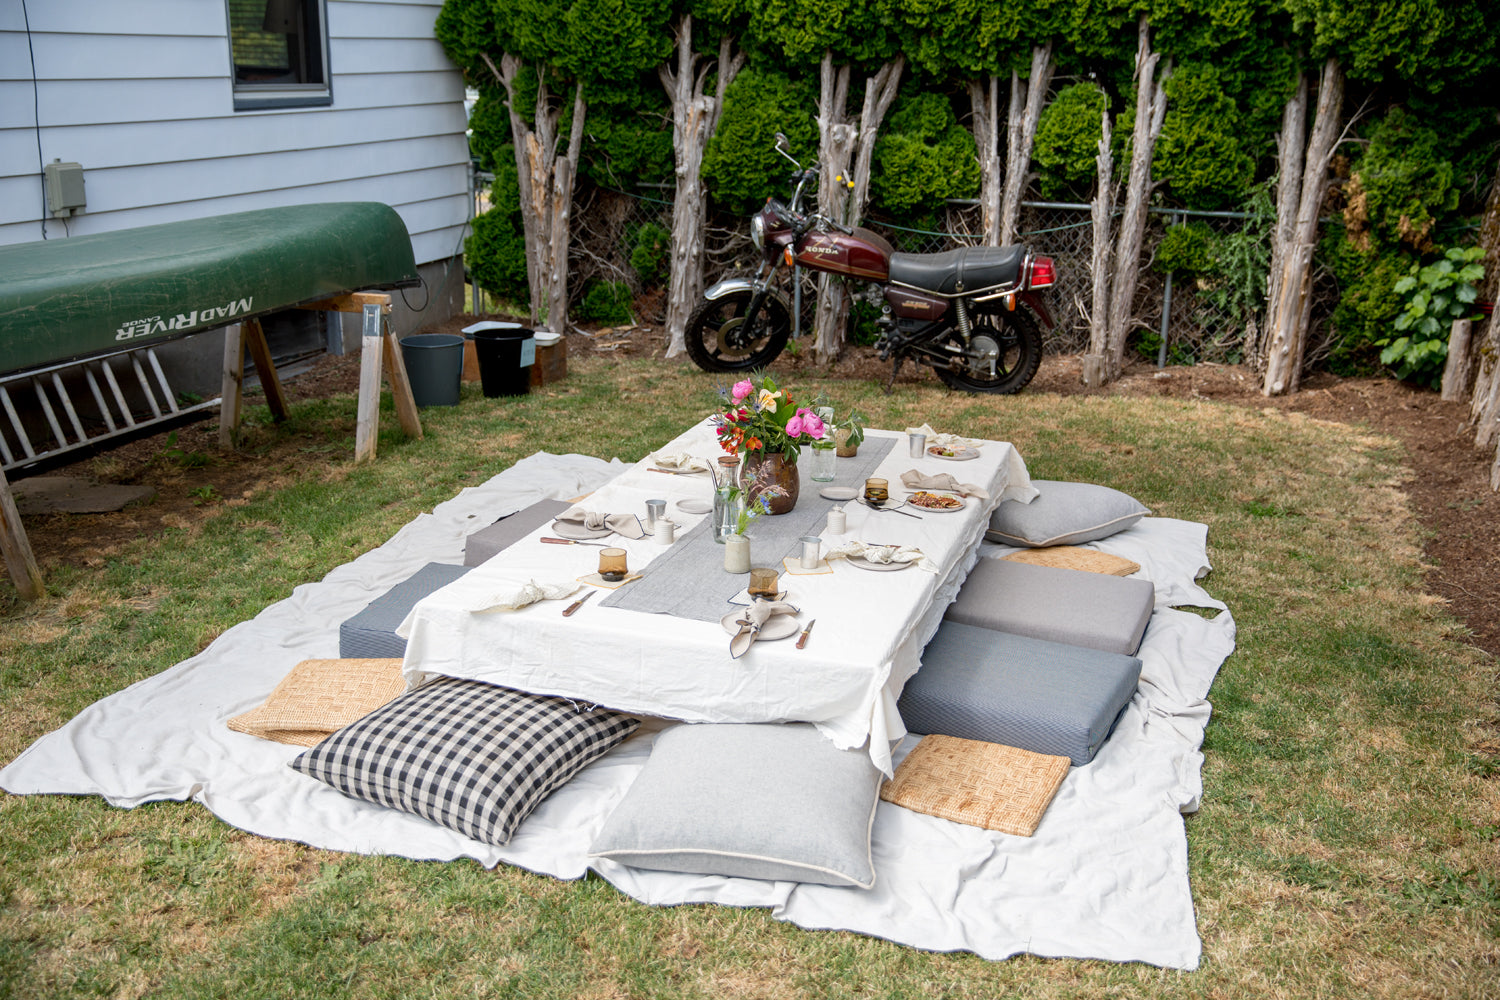 picnic blanket with pillows and a low table